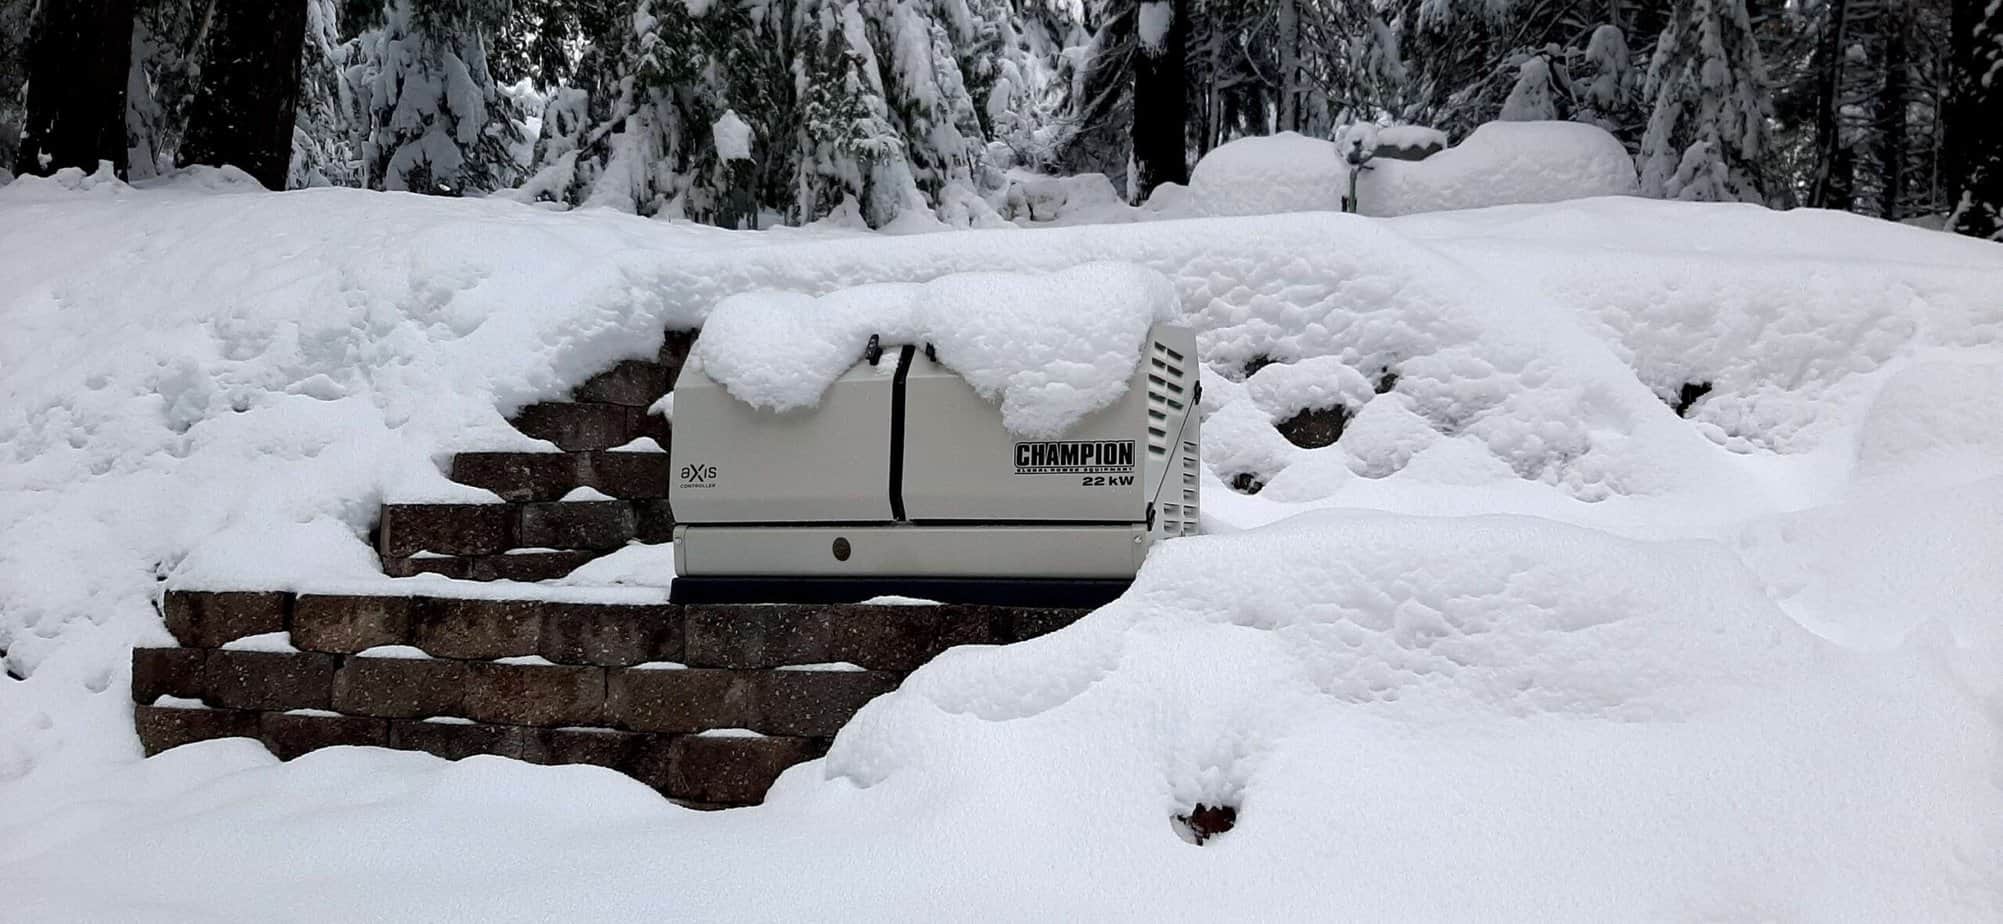 Champion 22kW Surrounded by Snow. The 22kW starts at temperatures below -20 F.